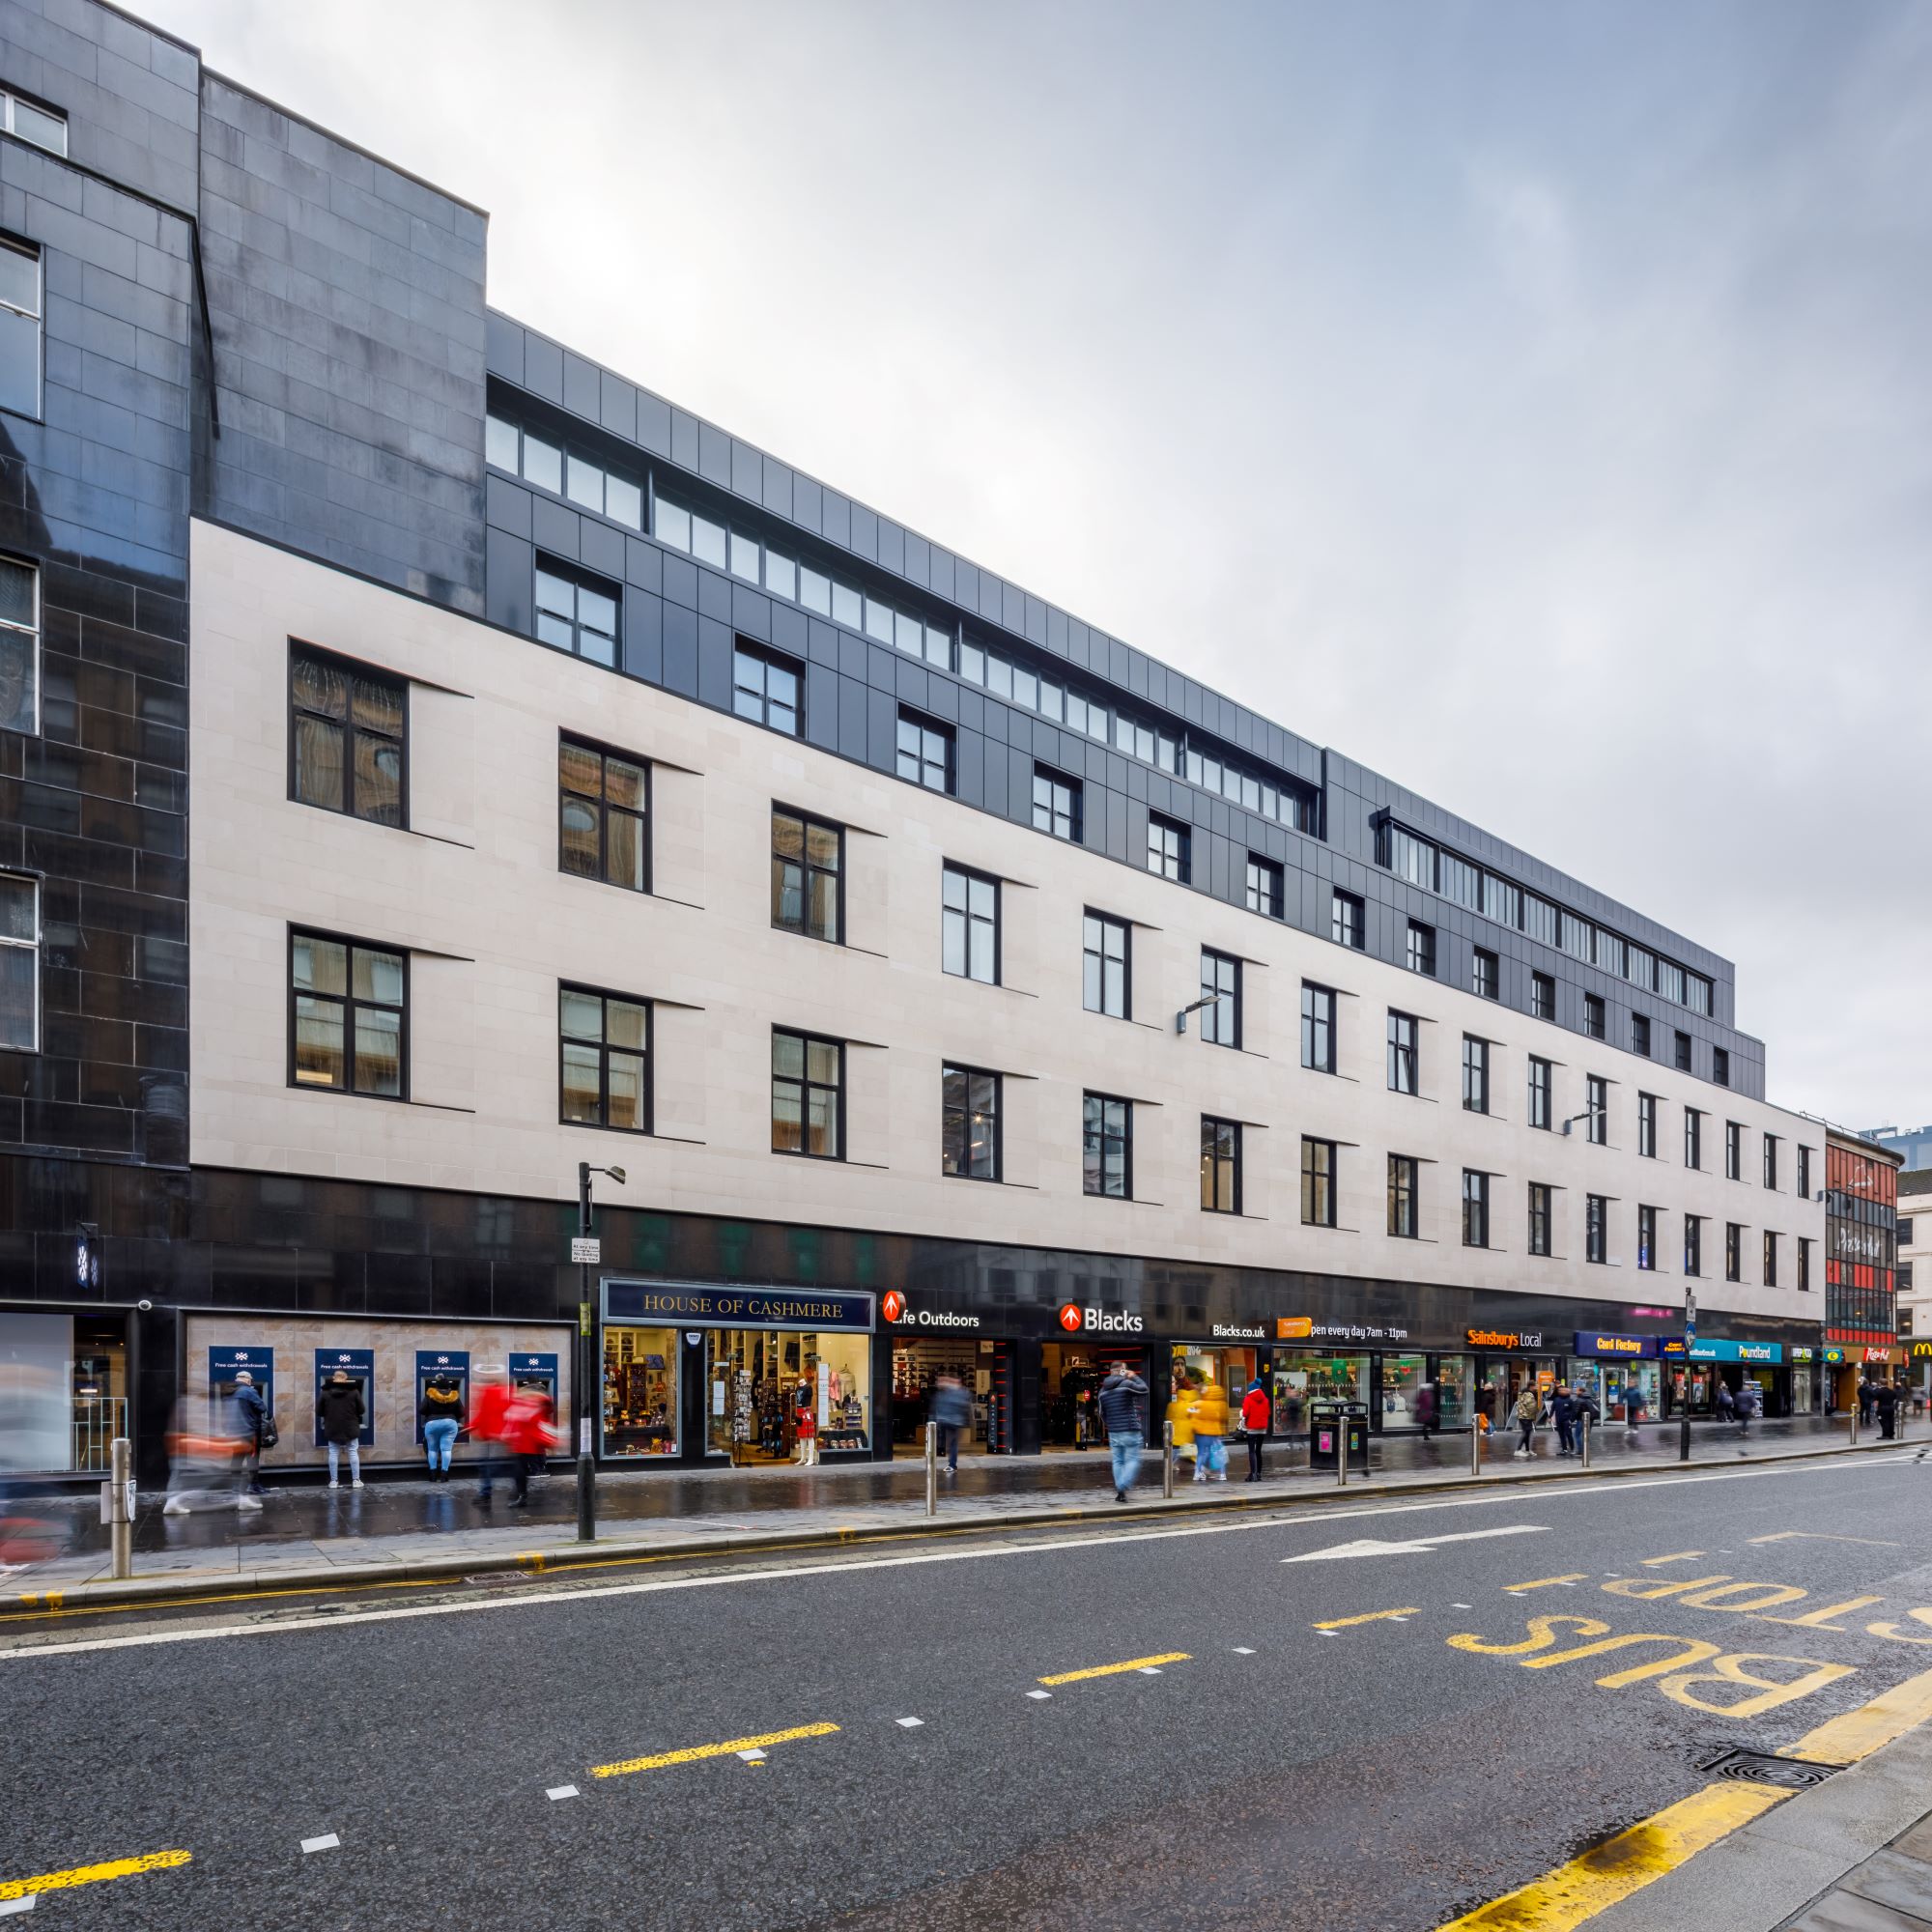 Fabric repairs provide a new lease of life at St Enoch Square